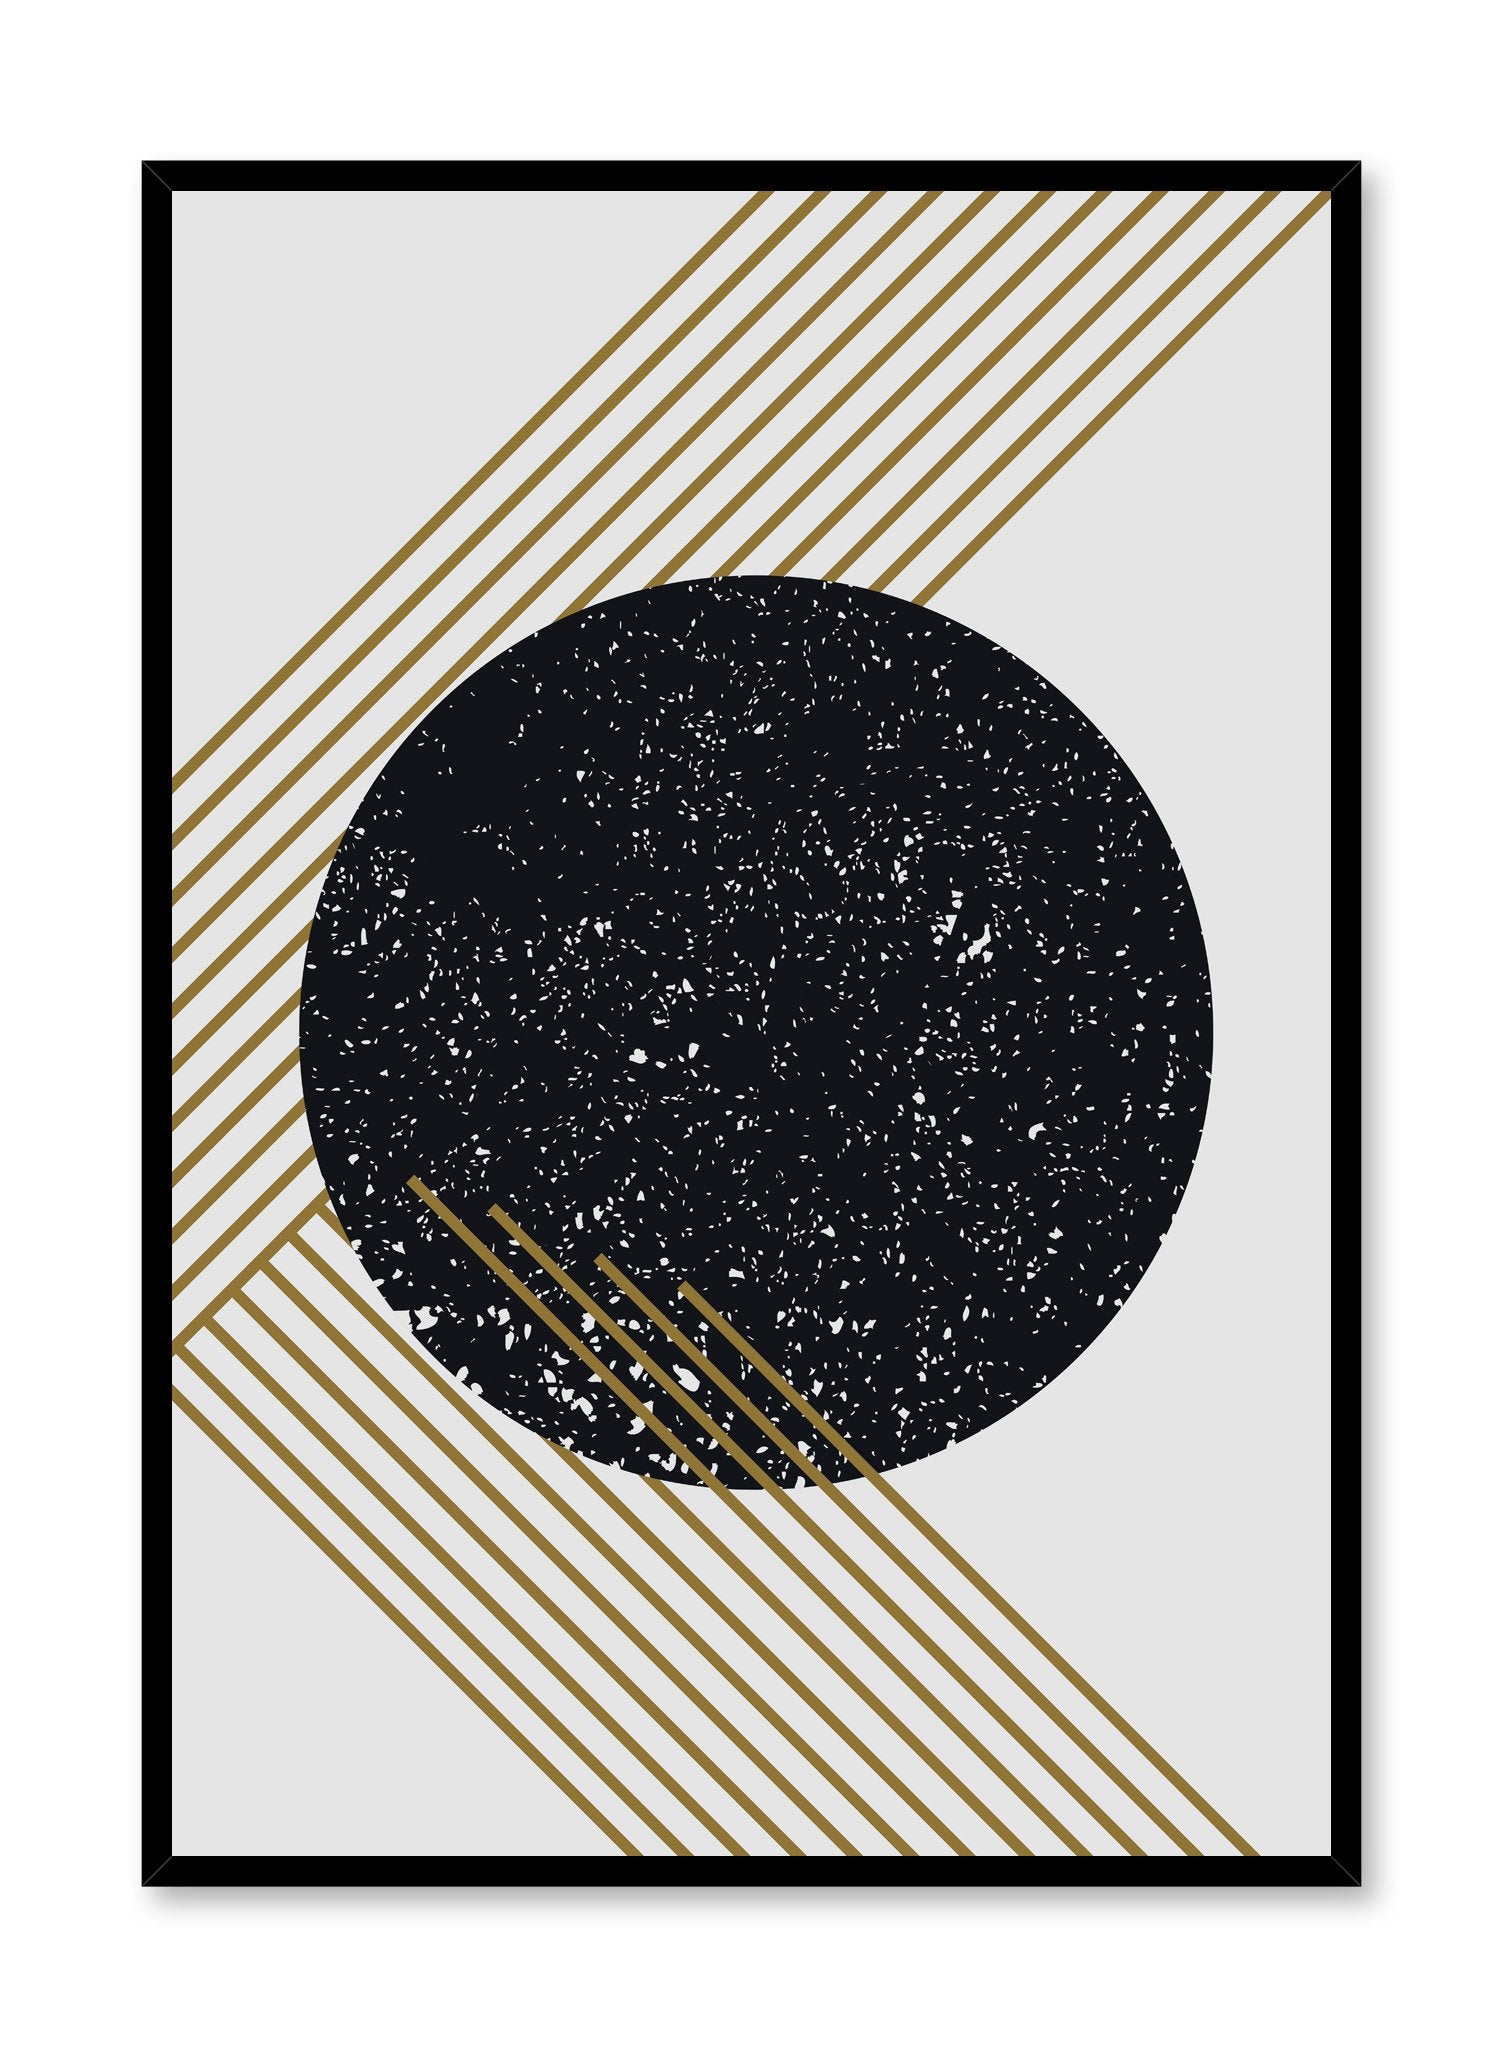 Modern minimalist poster by Opposite Wall with abstract graphic Gold Dust design